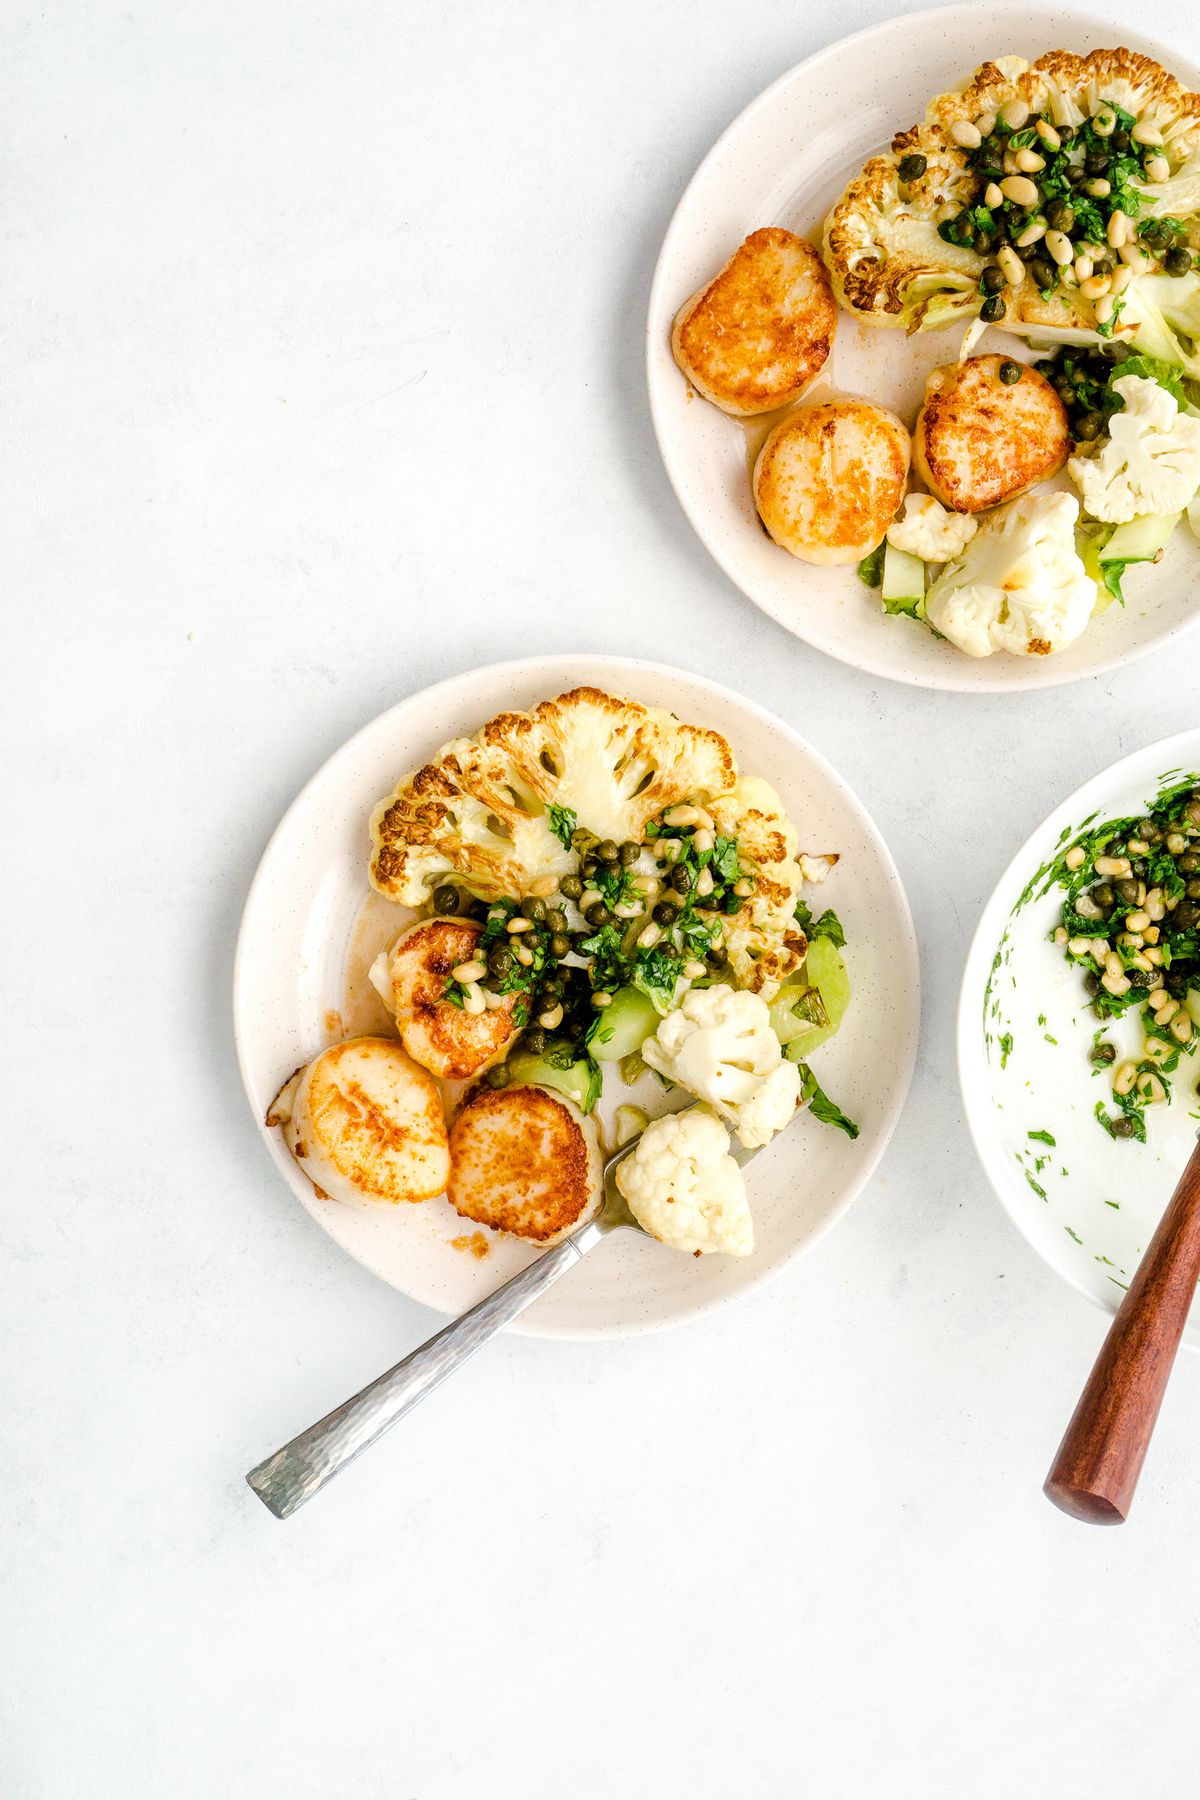 Low Carb Pan Seared Butter Basted Scallops with Roasted Cauliflower Steaks and Capers